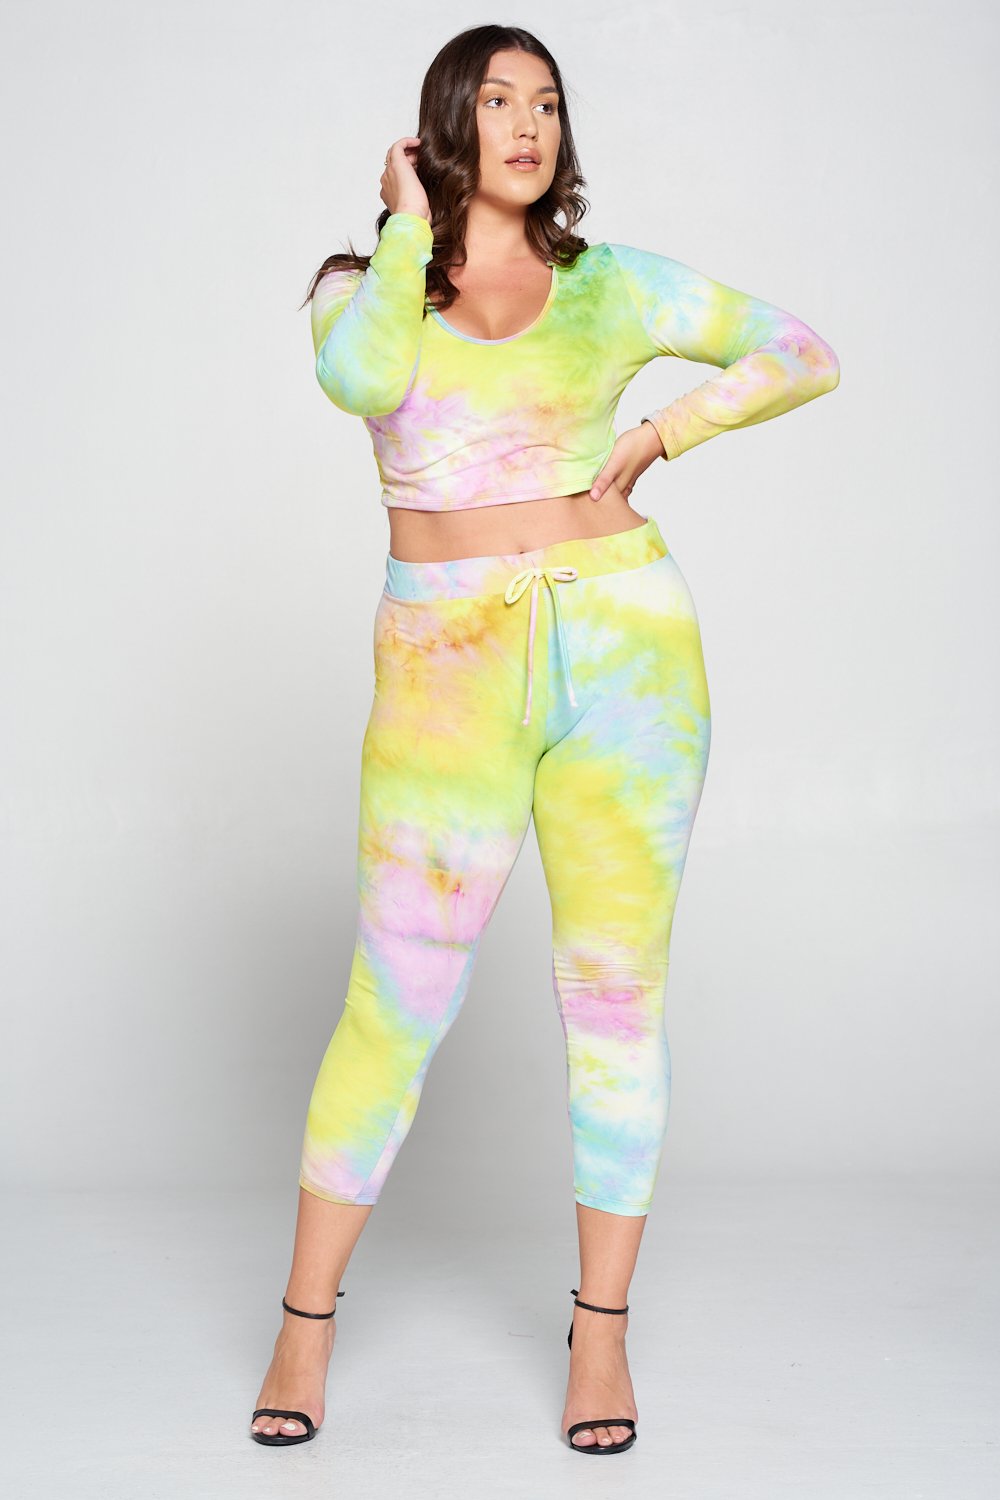 livd L I V D women's contemporary plus size  scoop neck crop hoodie and elastic band sweatpant with faux drawstring in yellow tie dye